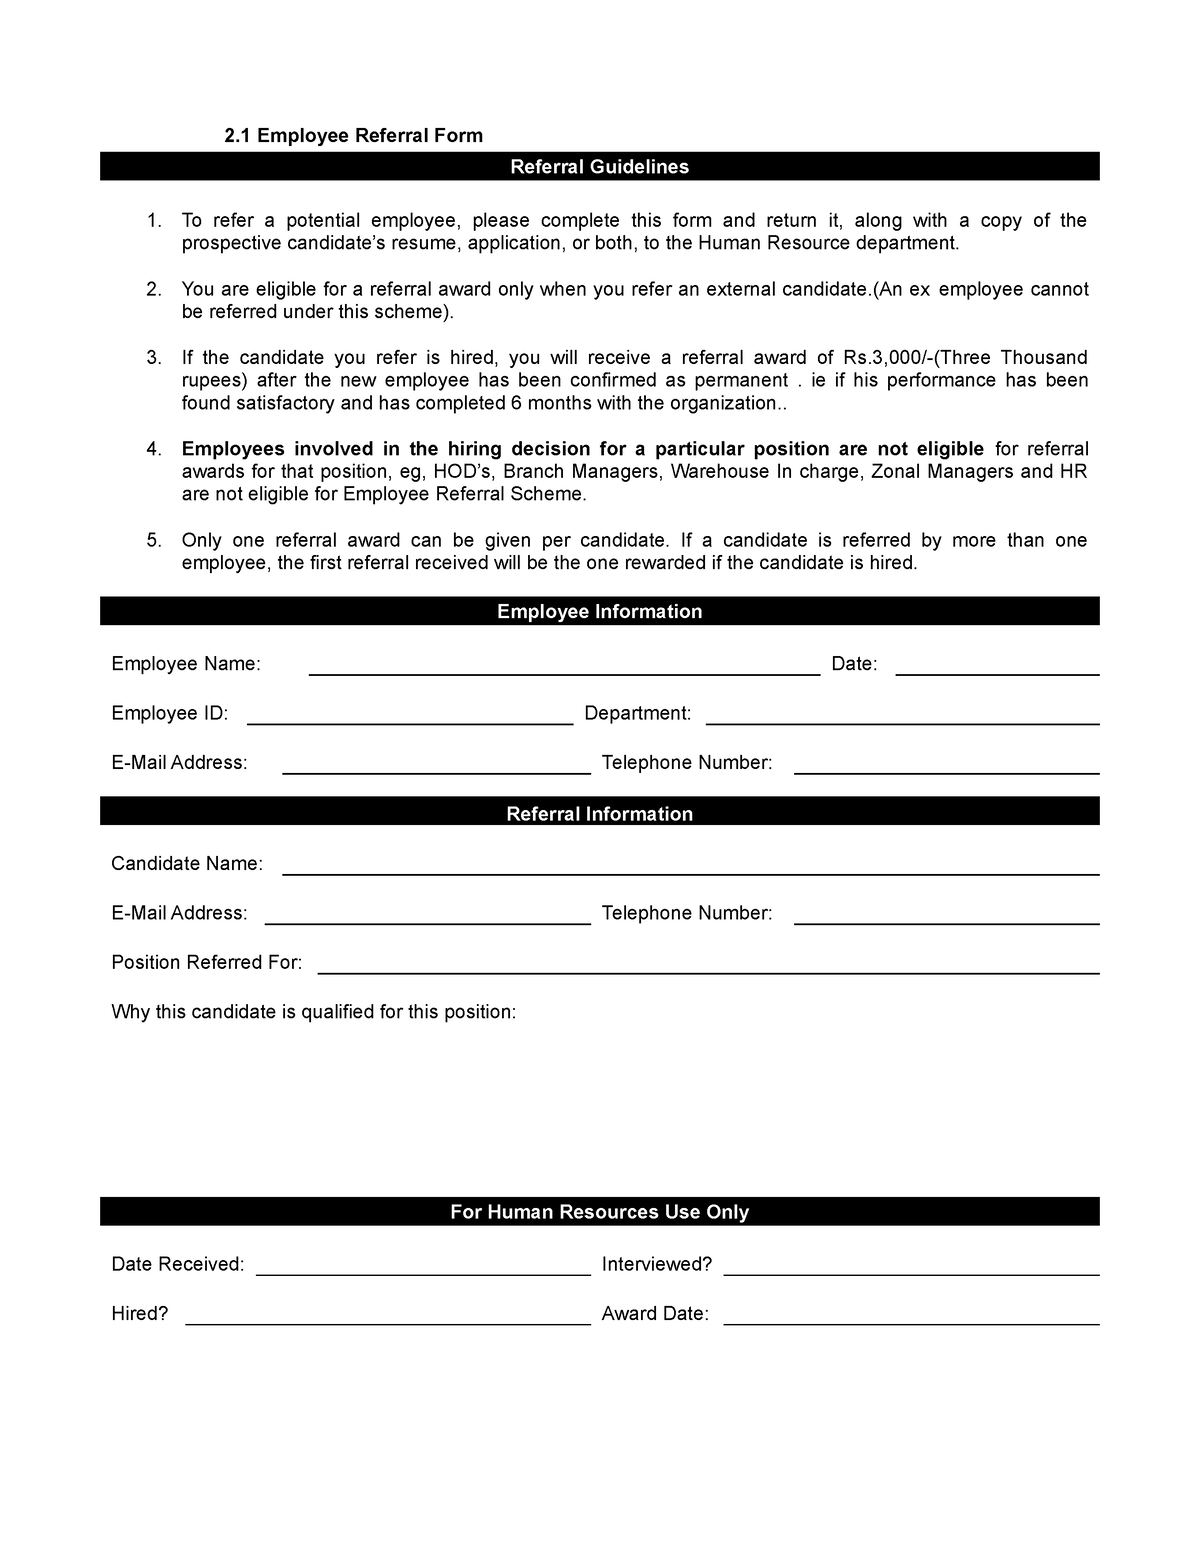 Referral Form Practice Material 2 Employee Referral Form Referral Guidelines To Refer A 3154